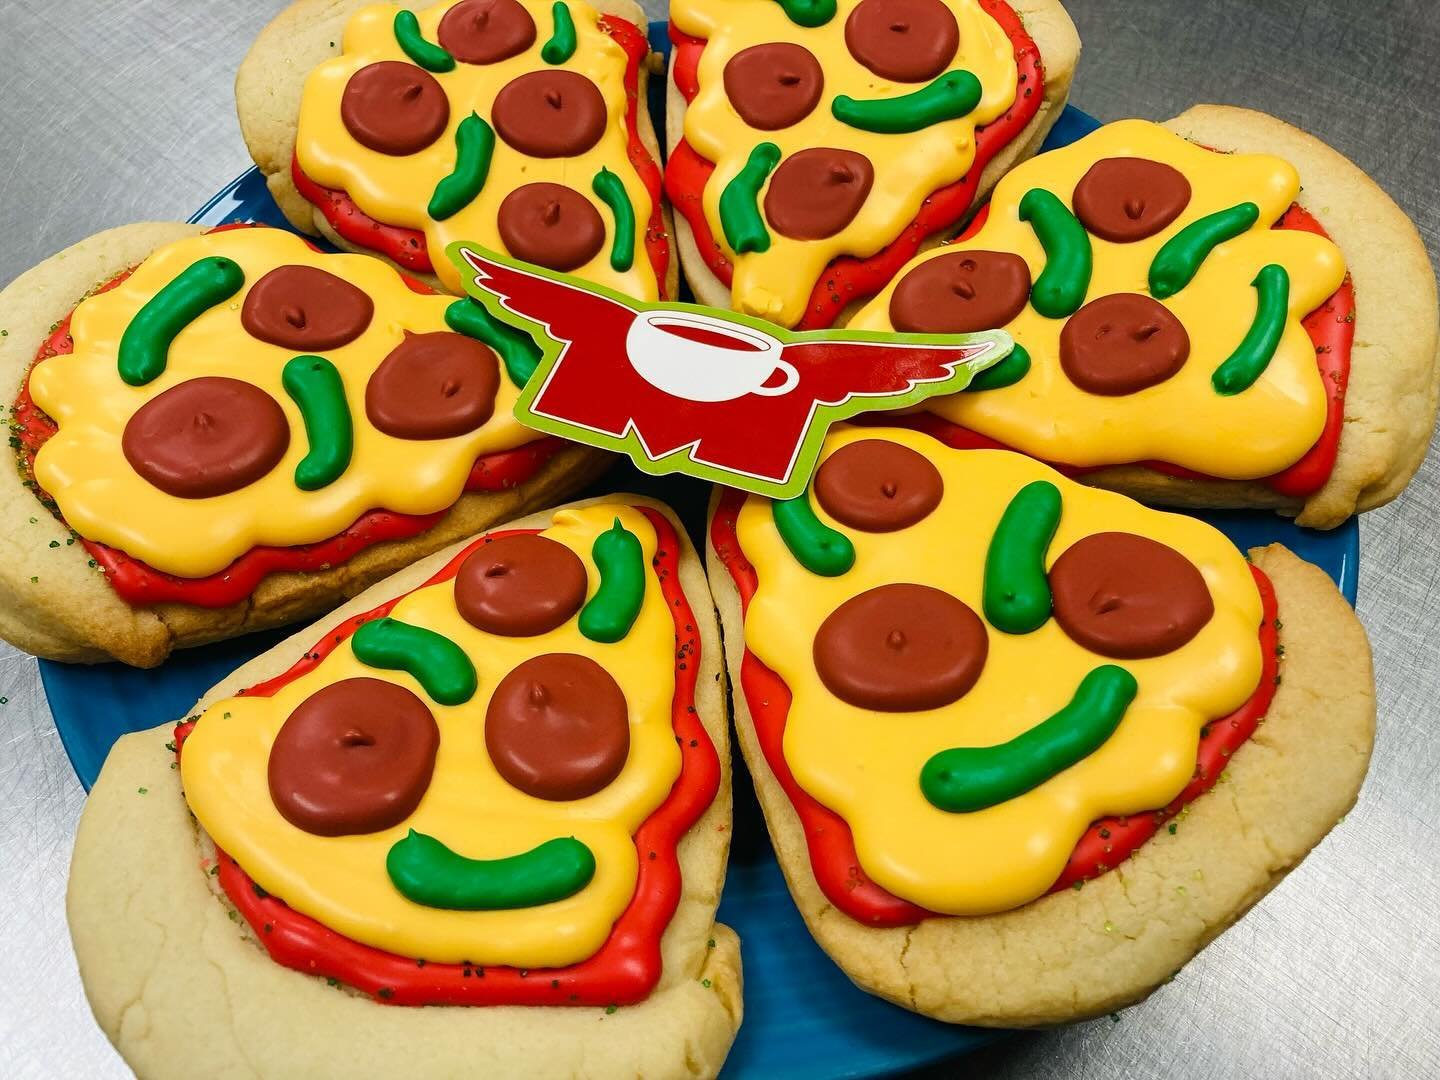 For Sugar Cookie Friday we&rsquo;re having&hellip;a Pizza Party! 😂🍕 #flyingmboise #downtownboise #flyingm